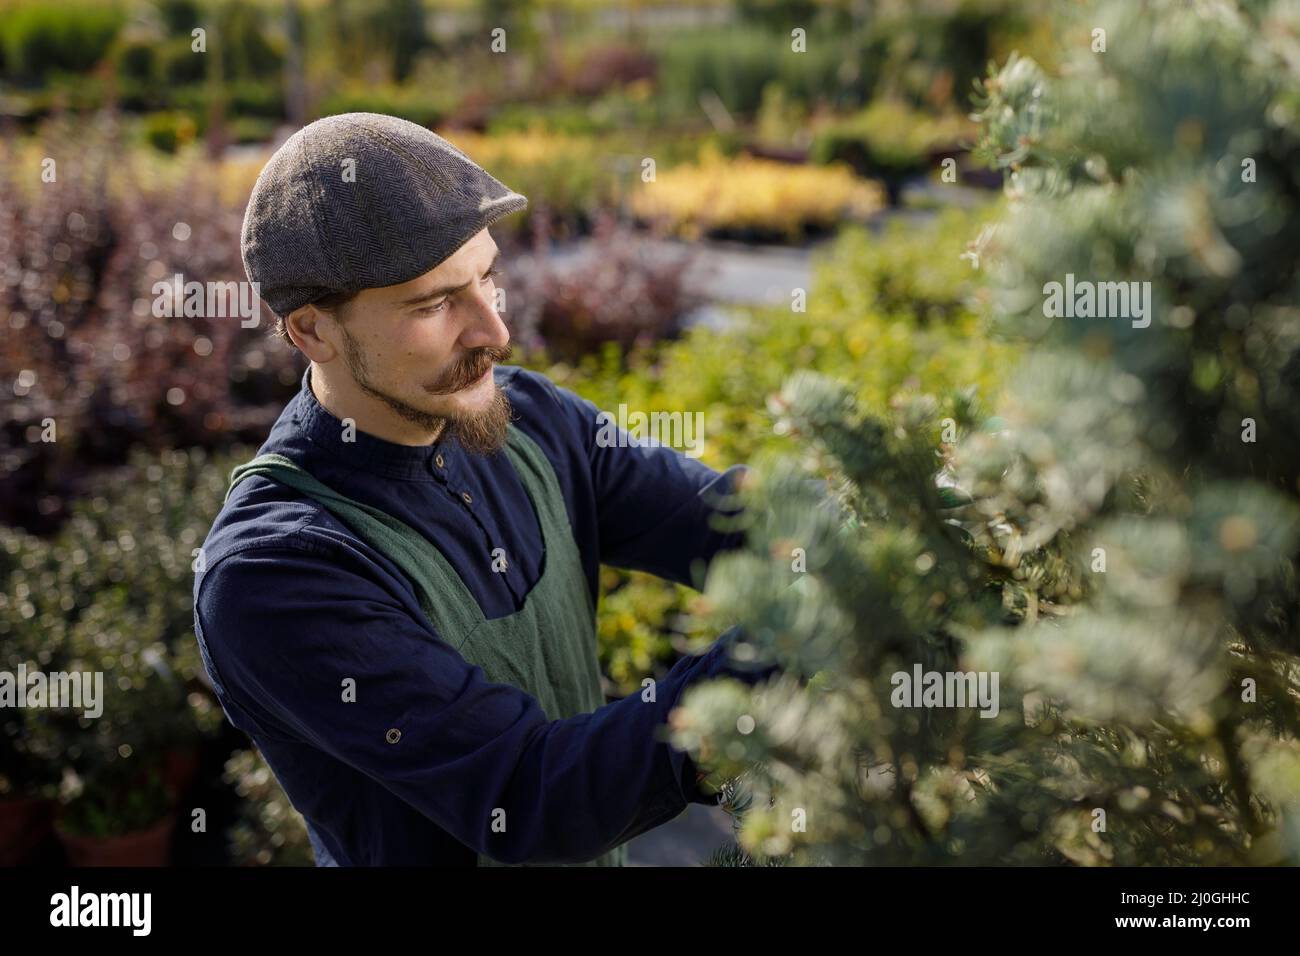 Cropped shot of a young male gardener while clipping or prune the tree in horticulture Stock Photo